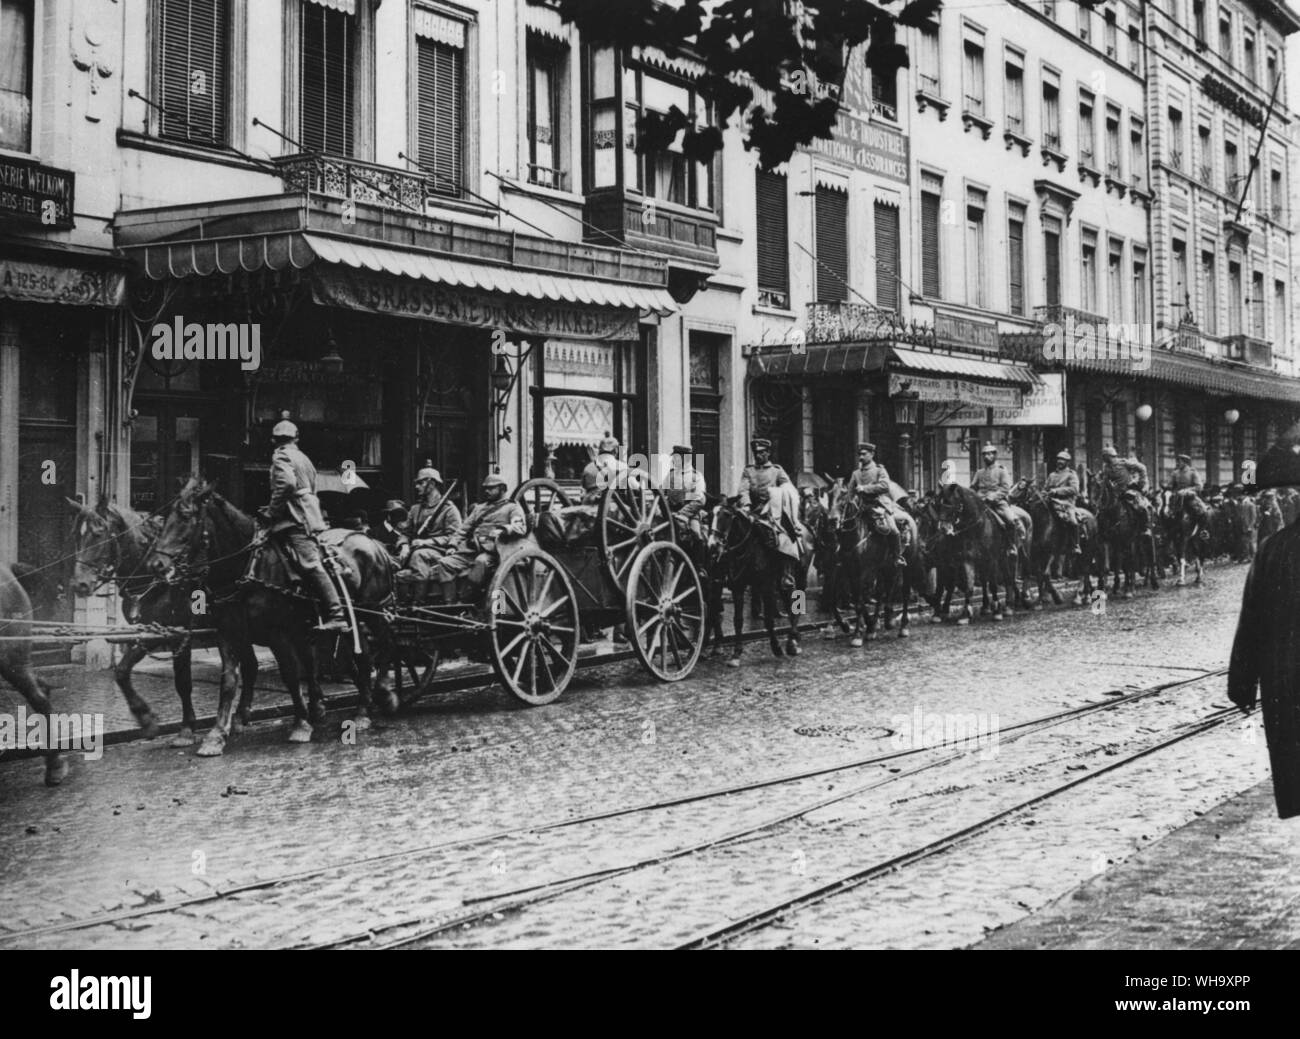 WW1: German occupation of Brussels, Belgium. German artillery passing through the streets, 26th Aug. 1914. Stock Photo